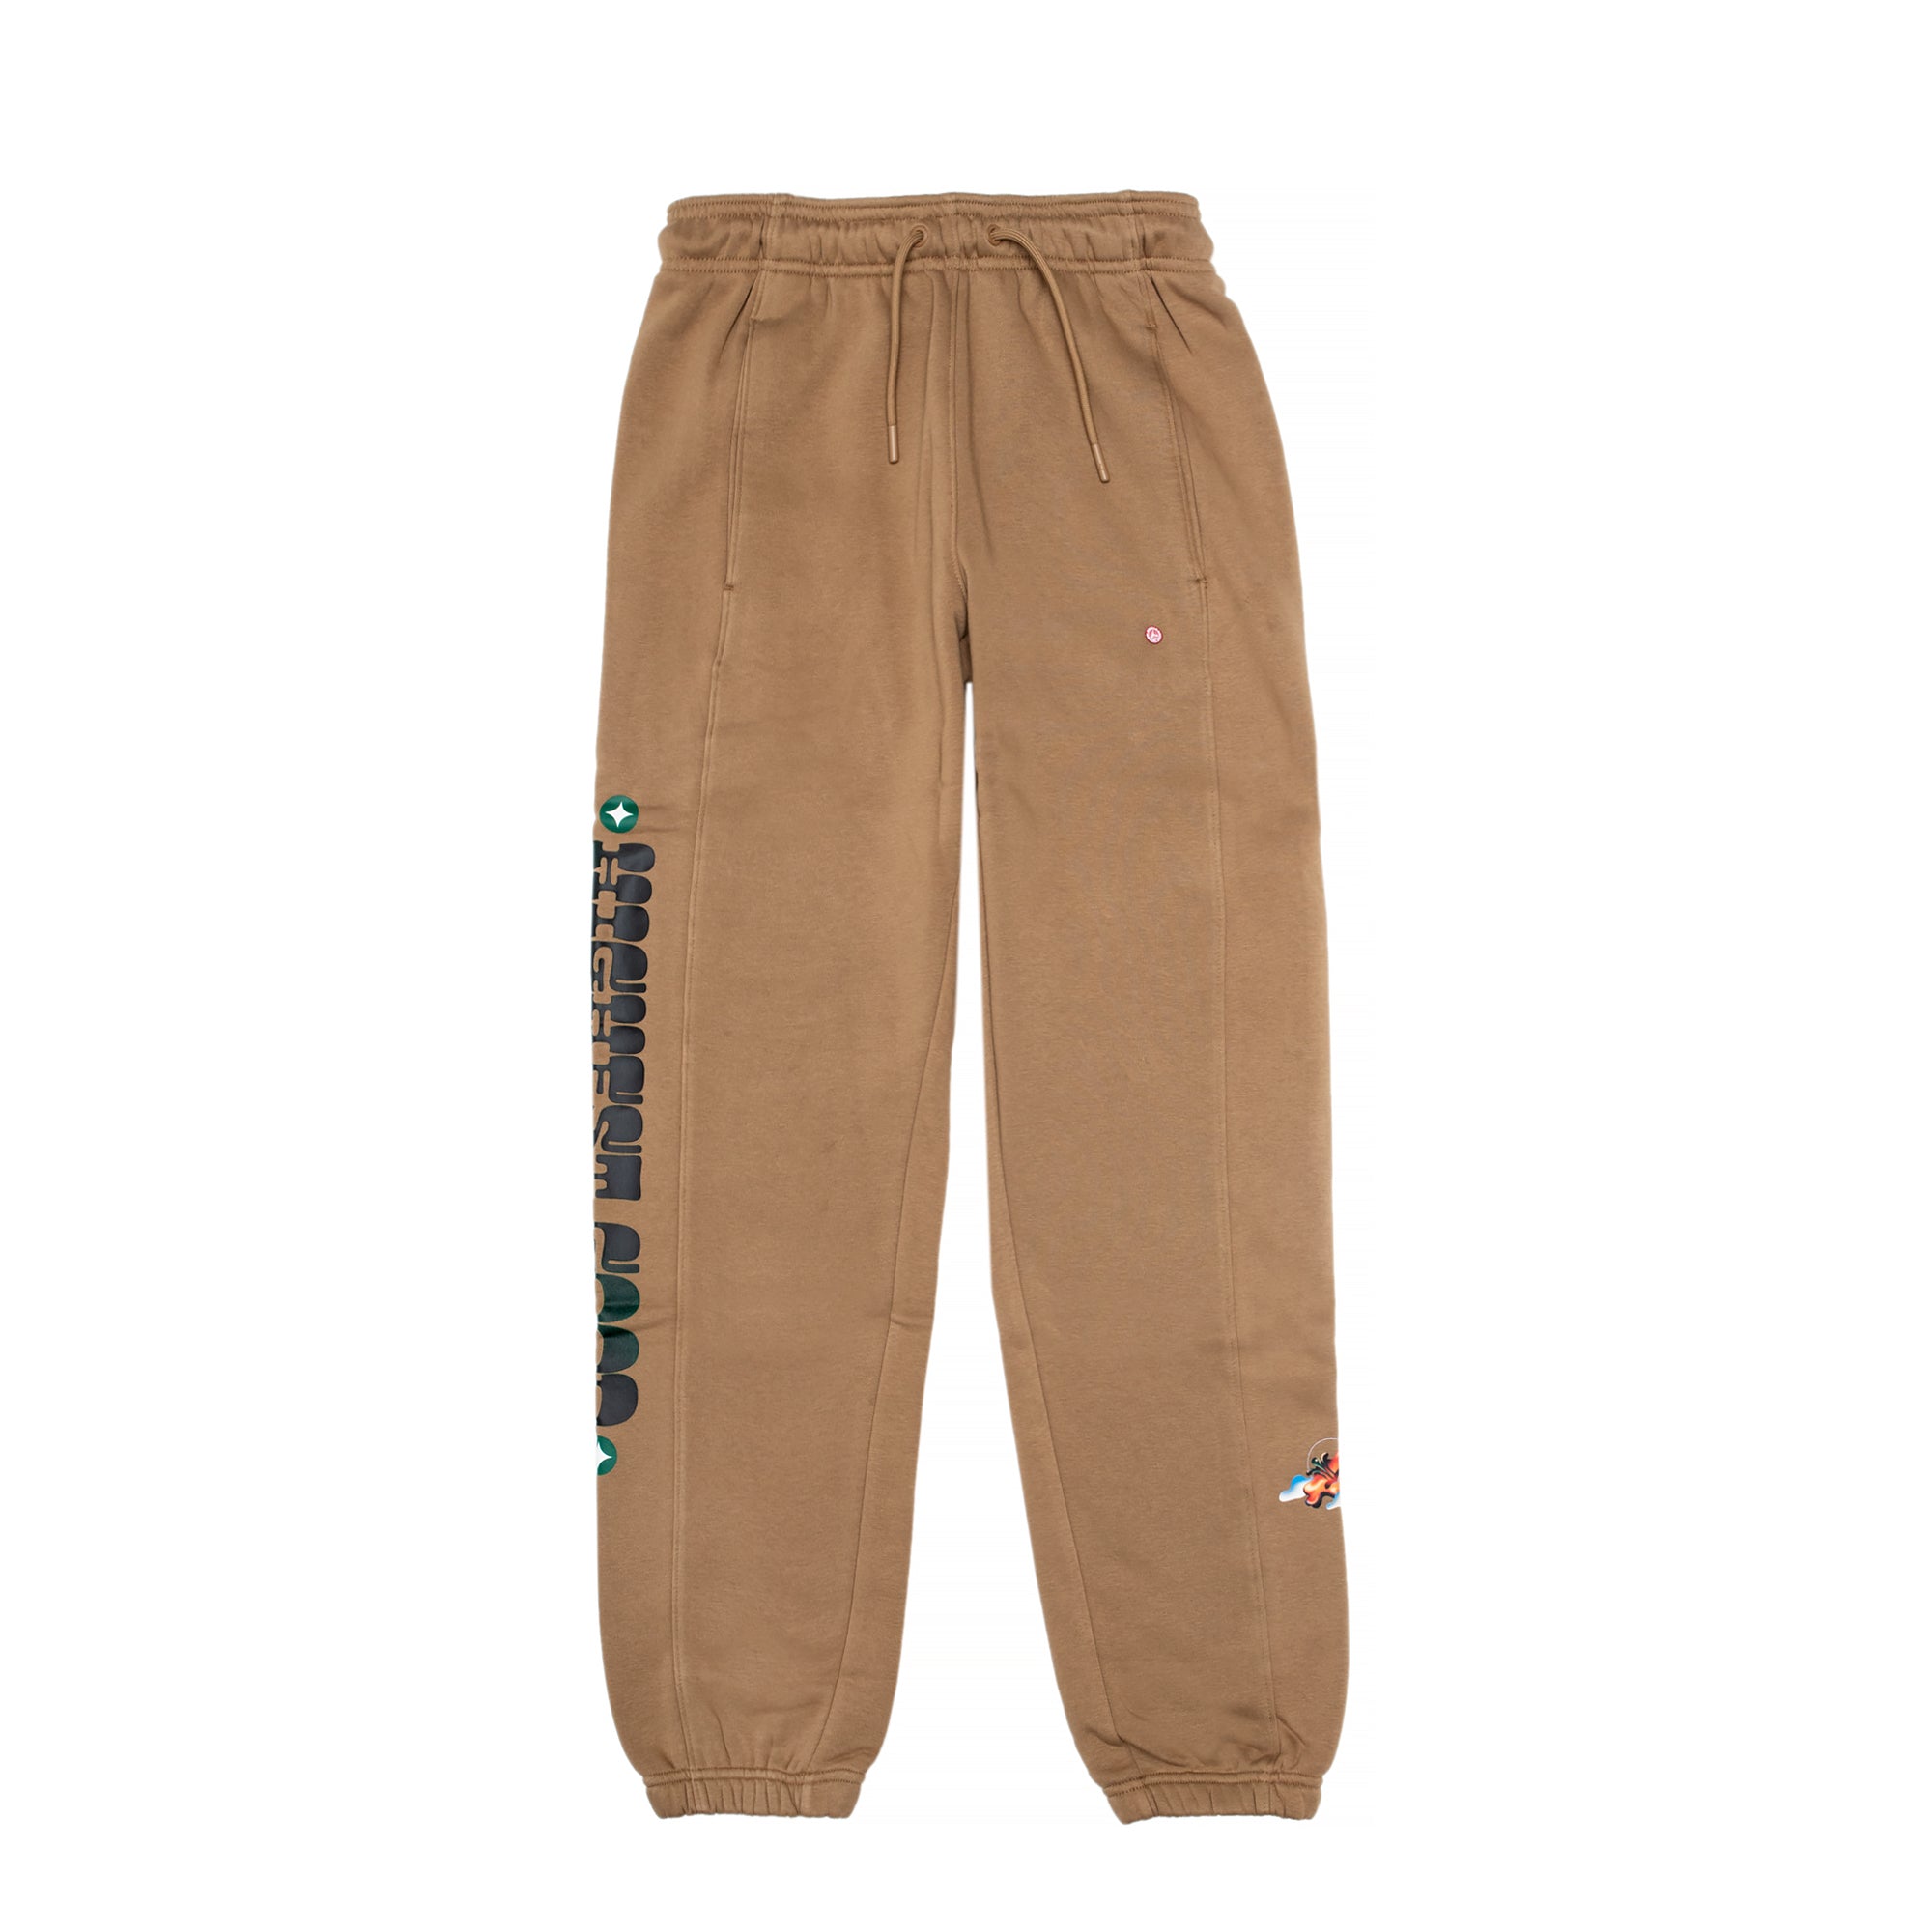 Brown Classic Sweatpants by Dime on Sale